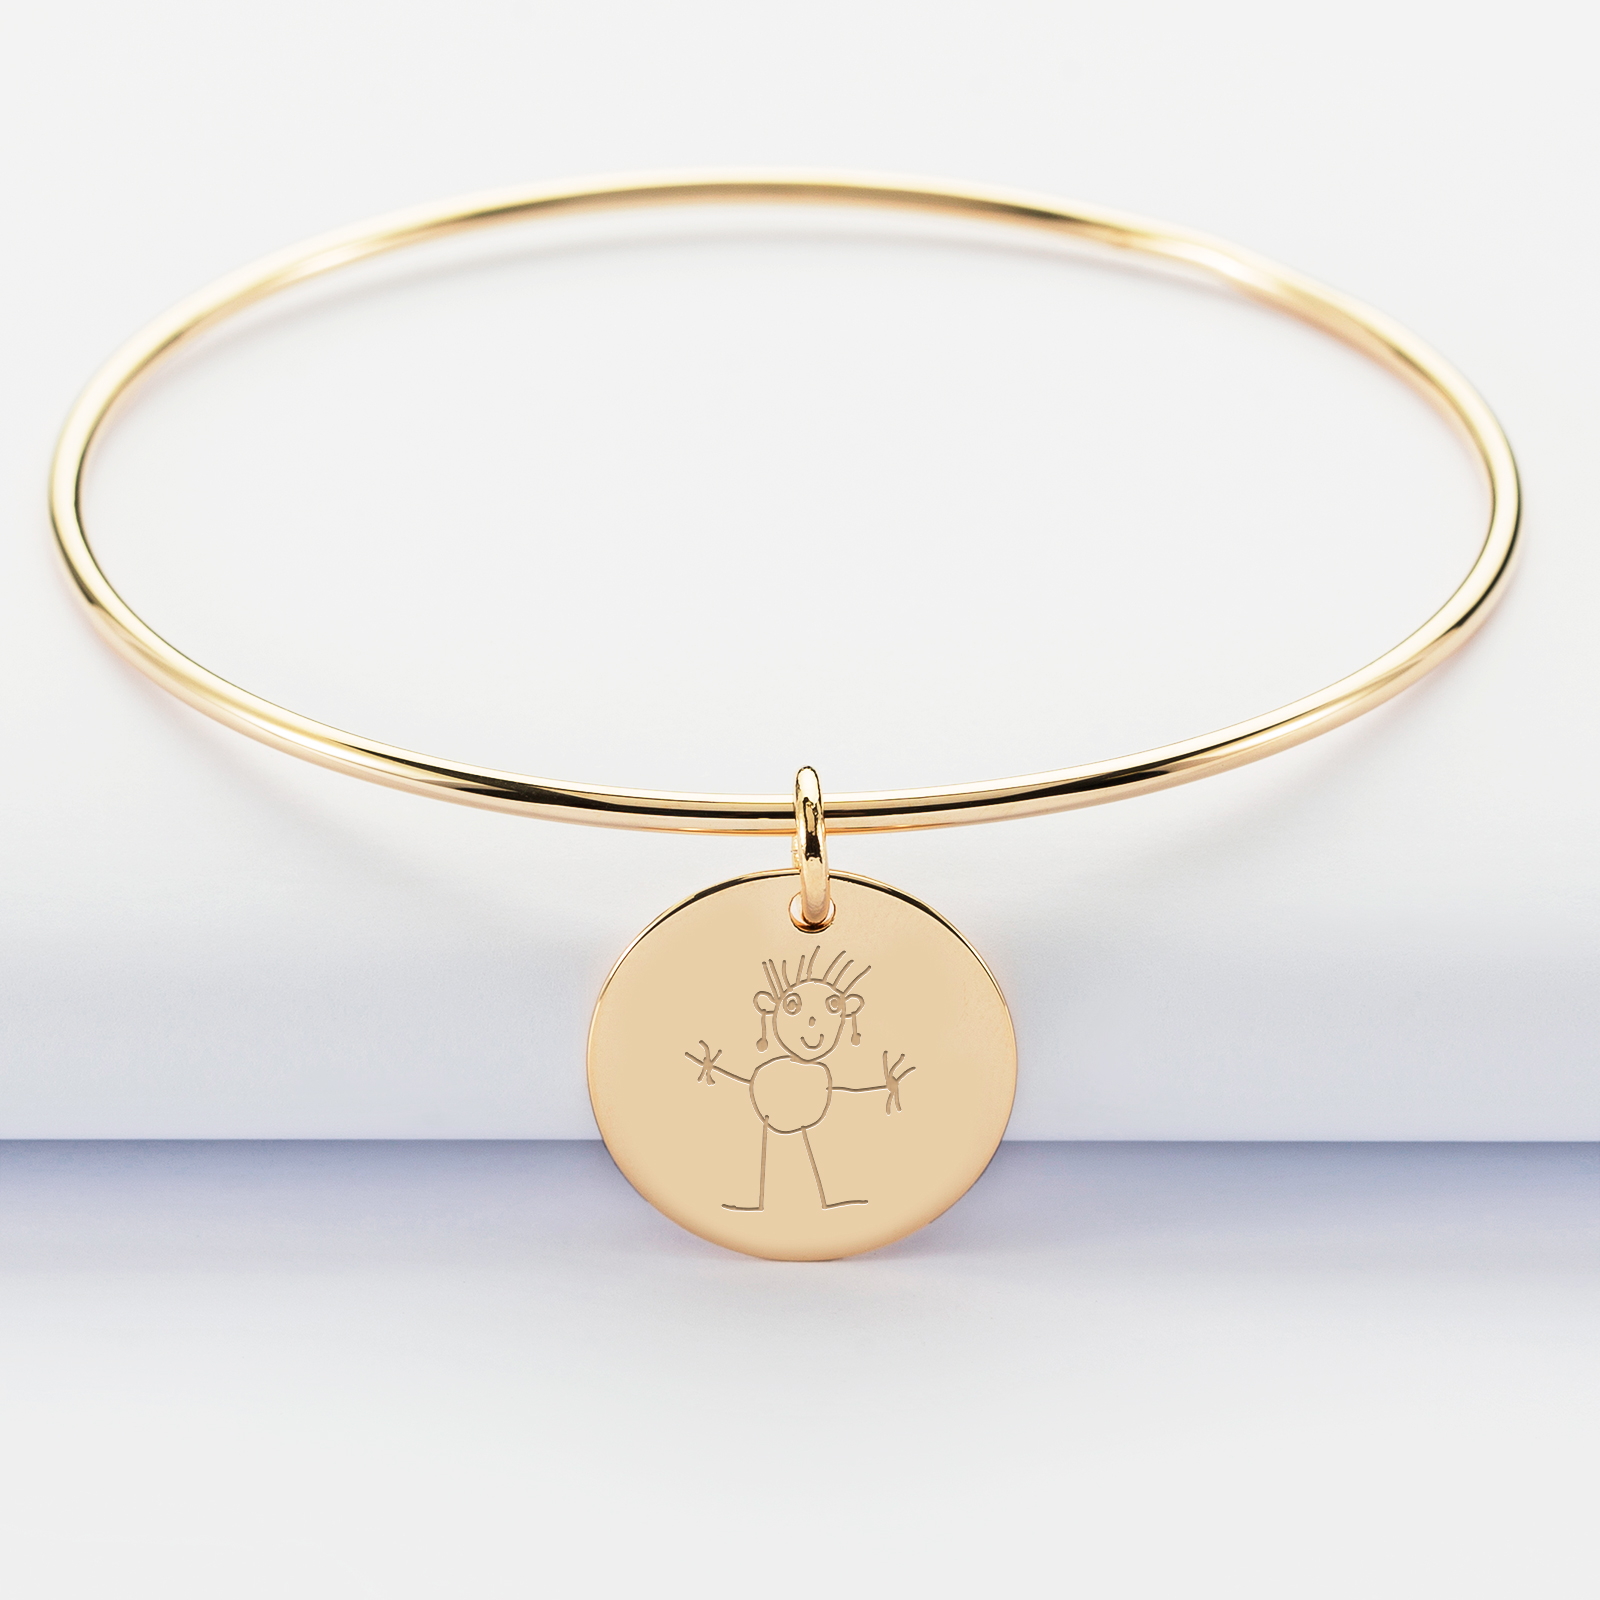 Personalised gold plated bangle and 19 mm engraved medallion - sketch